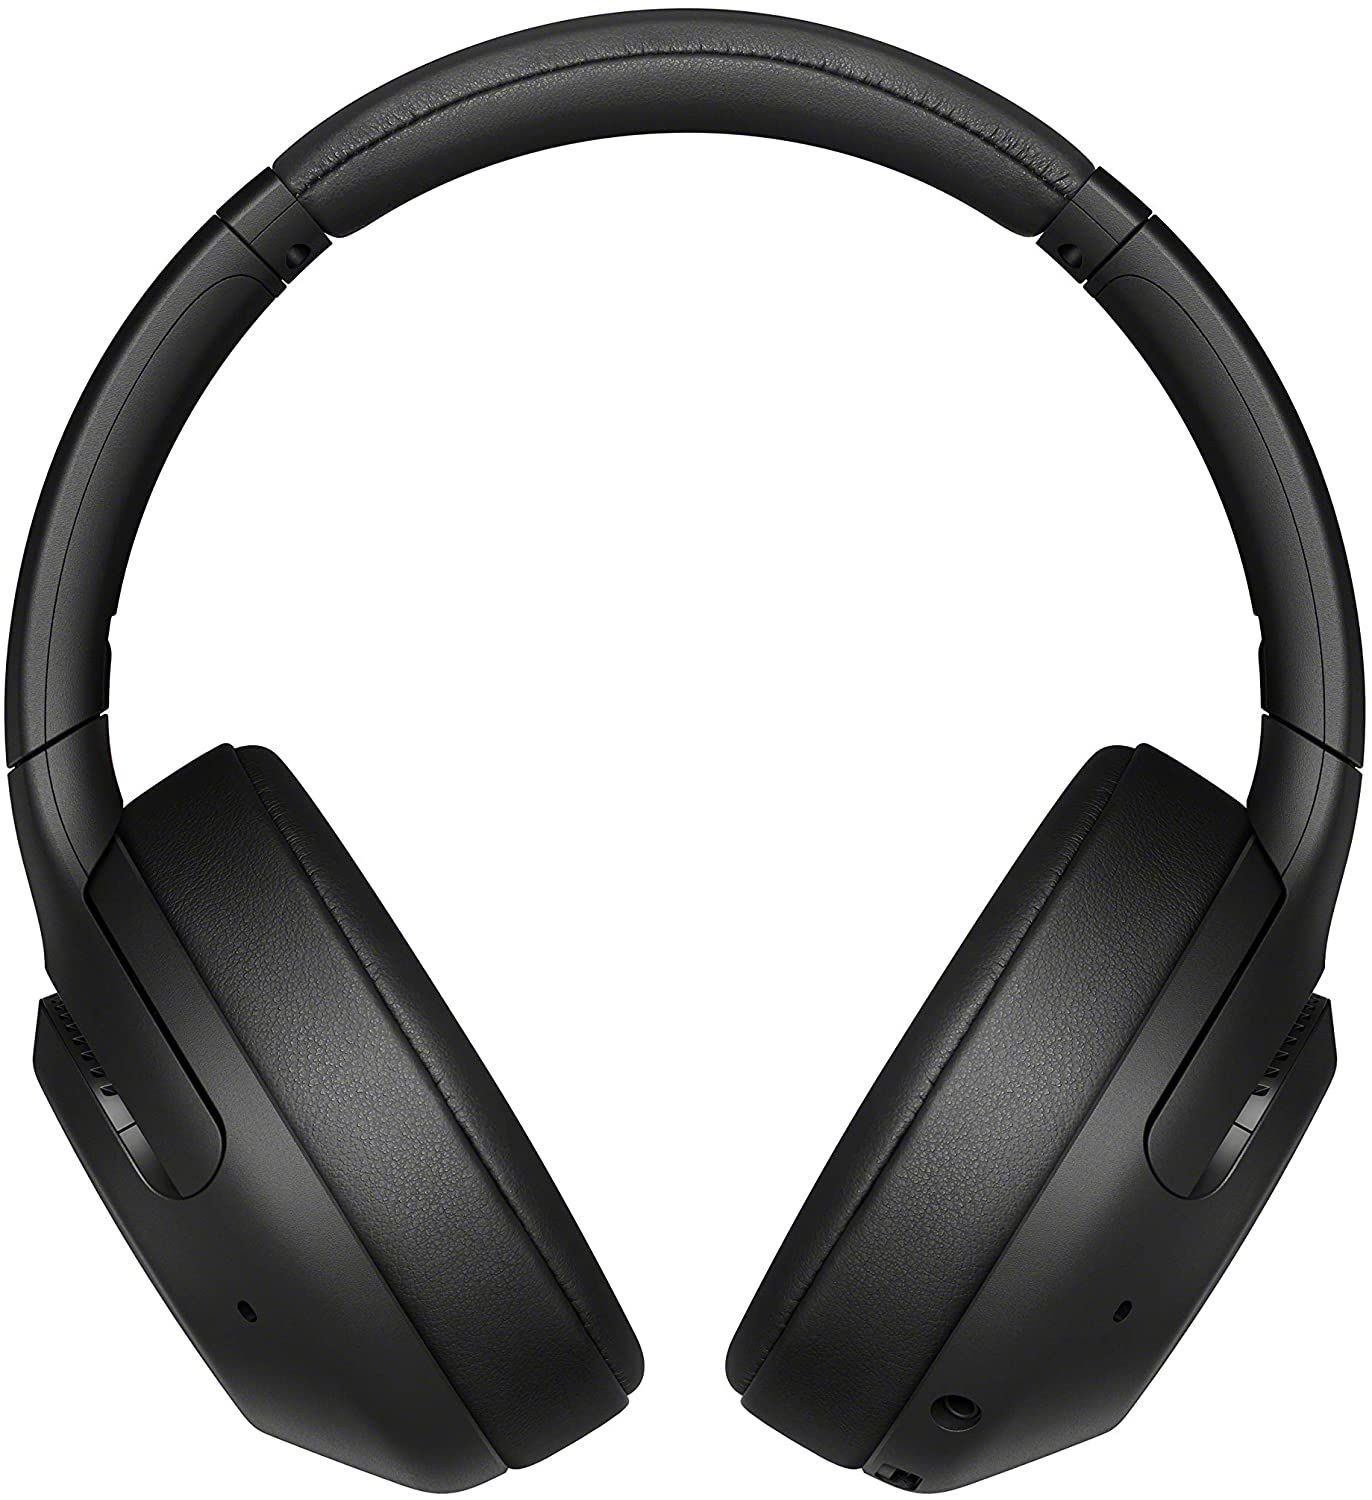 WH-XB900N Noise Cancelling Wireless Headphones